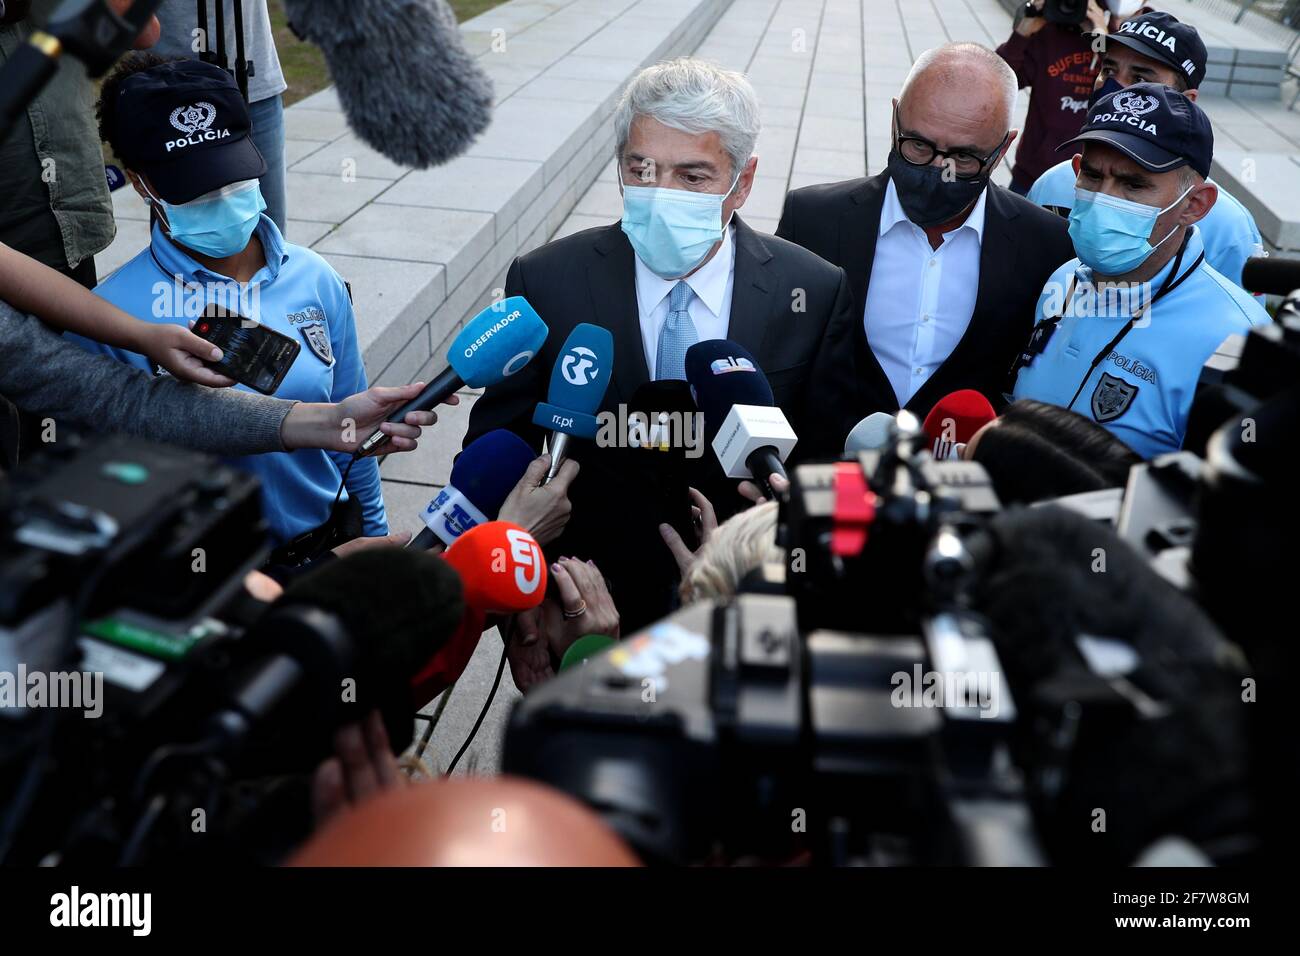 Lisbon, Portugal. 9th Apr, 2021. Portugal's former Prime Minister Jose Socrates speaks to journalists as he leaves a court in Lisbon, Portugal, April 9, 2021. Jose Socrates will be the country's first head of government to stand trial, having been indicted for money laundering and forgery of documents, according to a decision by Judge Ivo Rosa on Friday. Credit: Pedro Fiuza/Xinhua/Alamy Live News Stock Photo